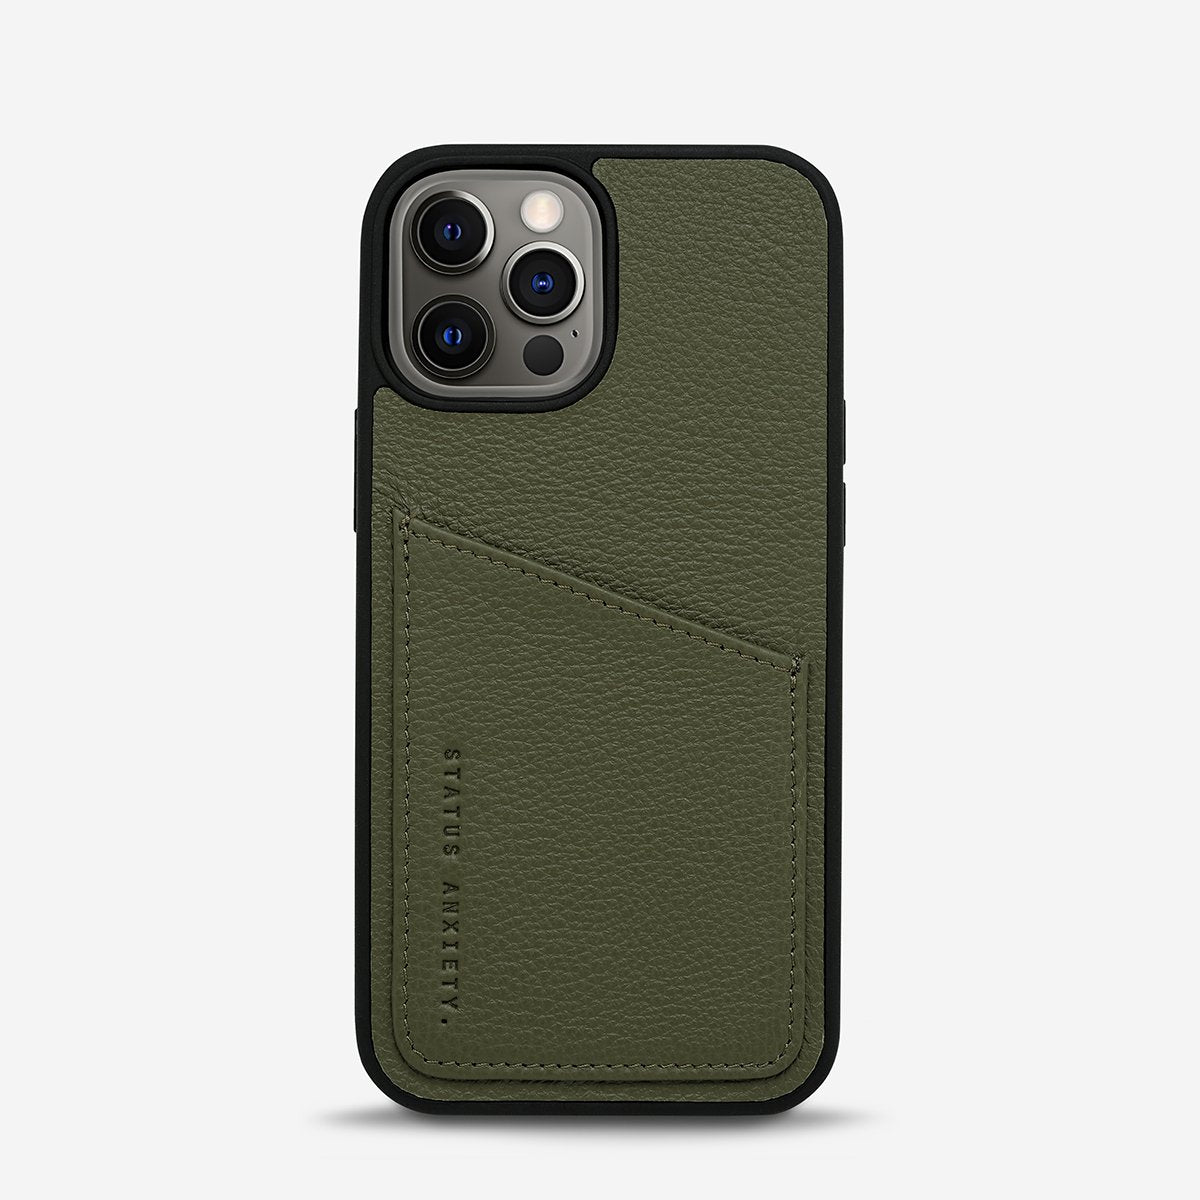 Who's Who Leather iPhone Case in Khaki